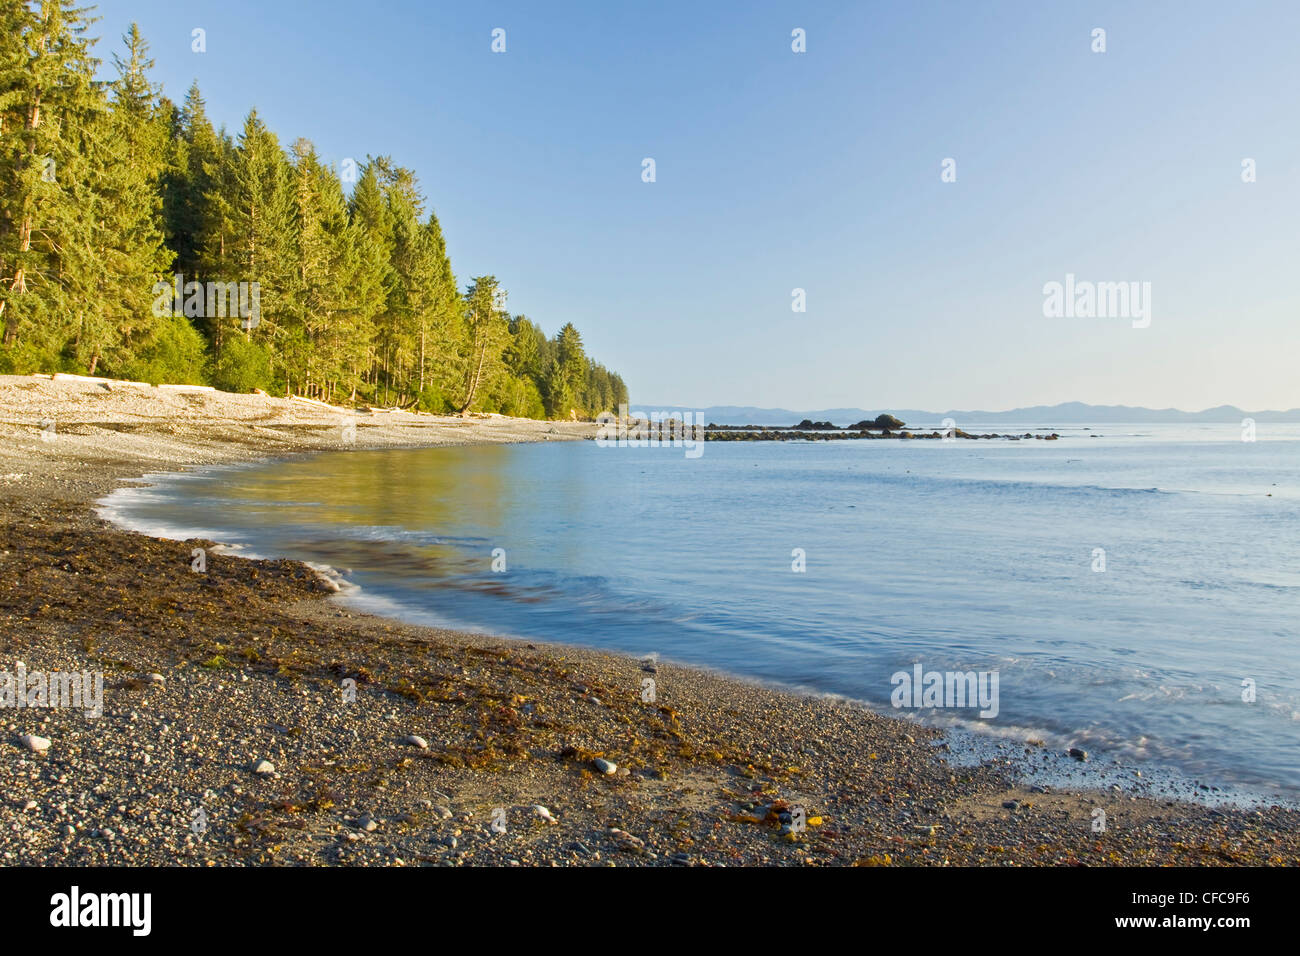 A landscape image of Sombrio Beach on Vancouver Island, BC, Canada. Stock Photo